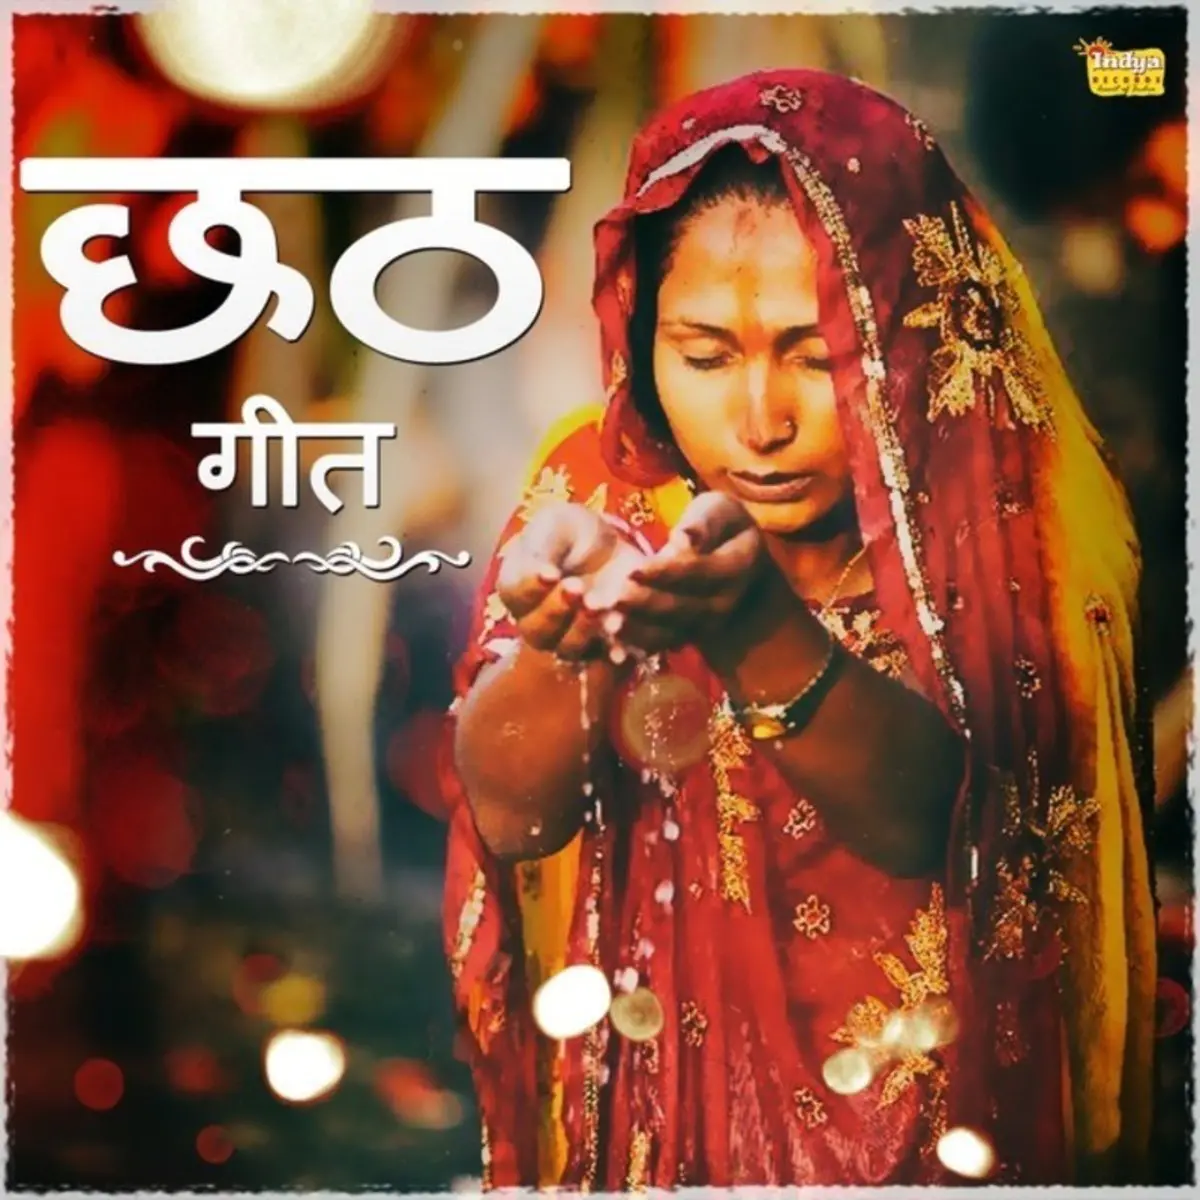 Download chhath mp3 song Chhath Puja